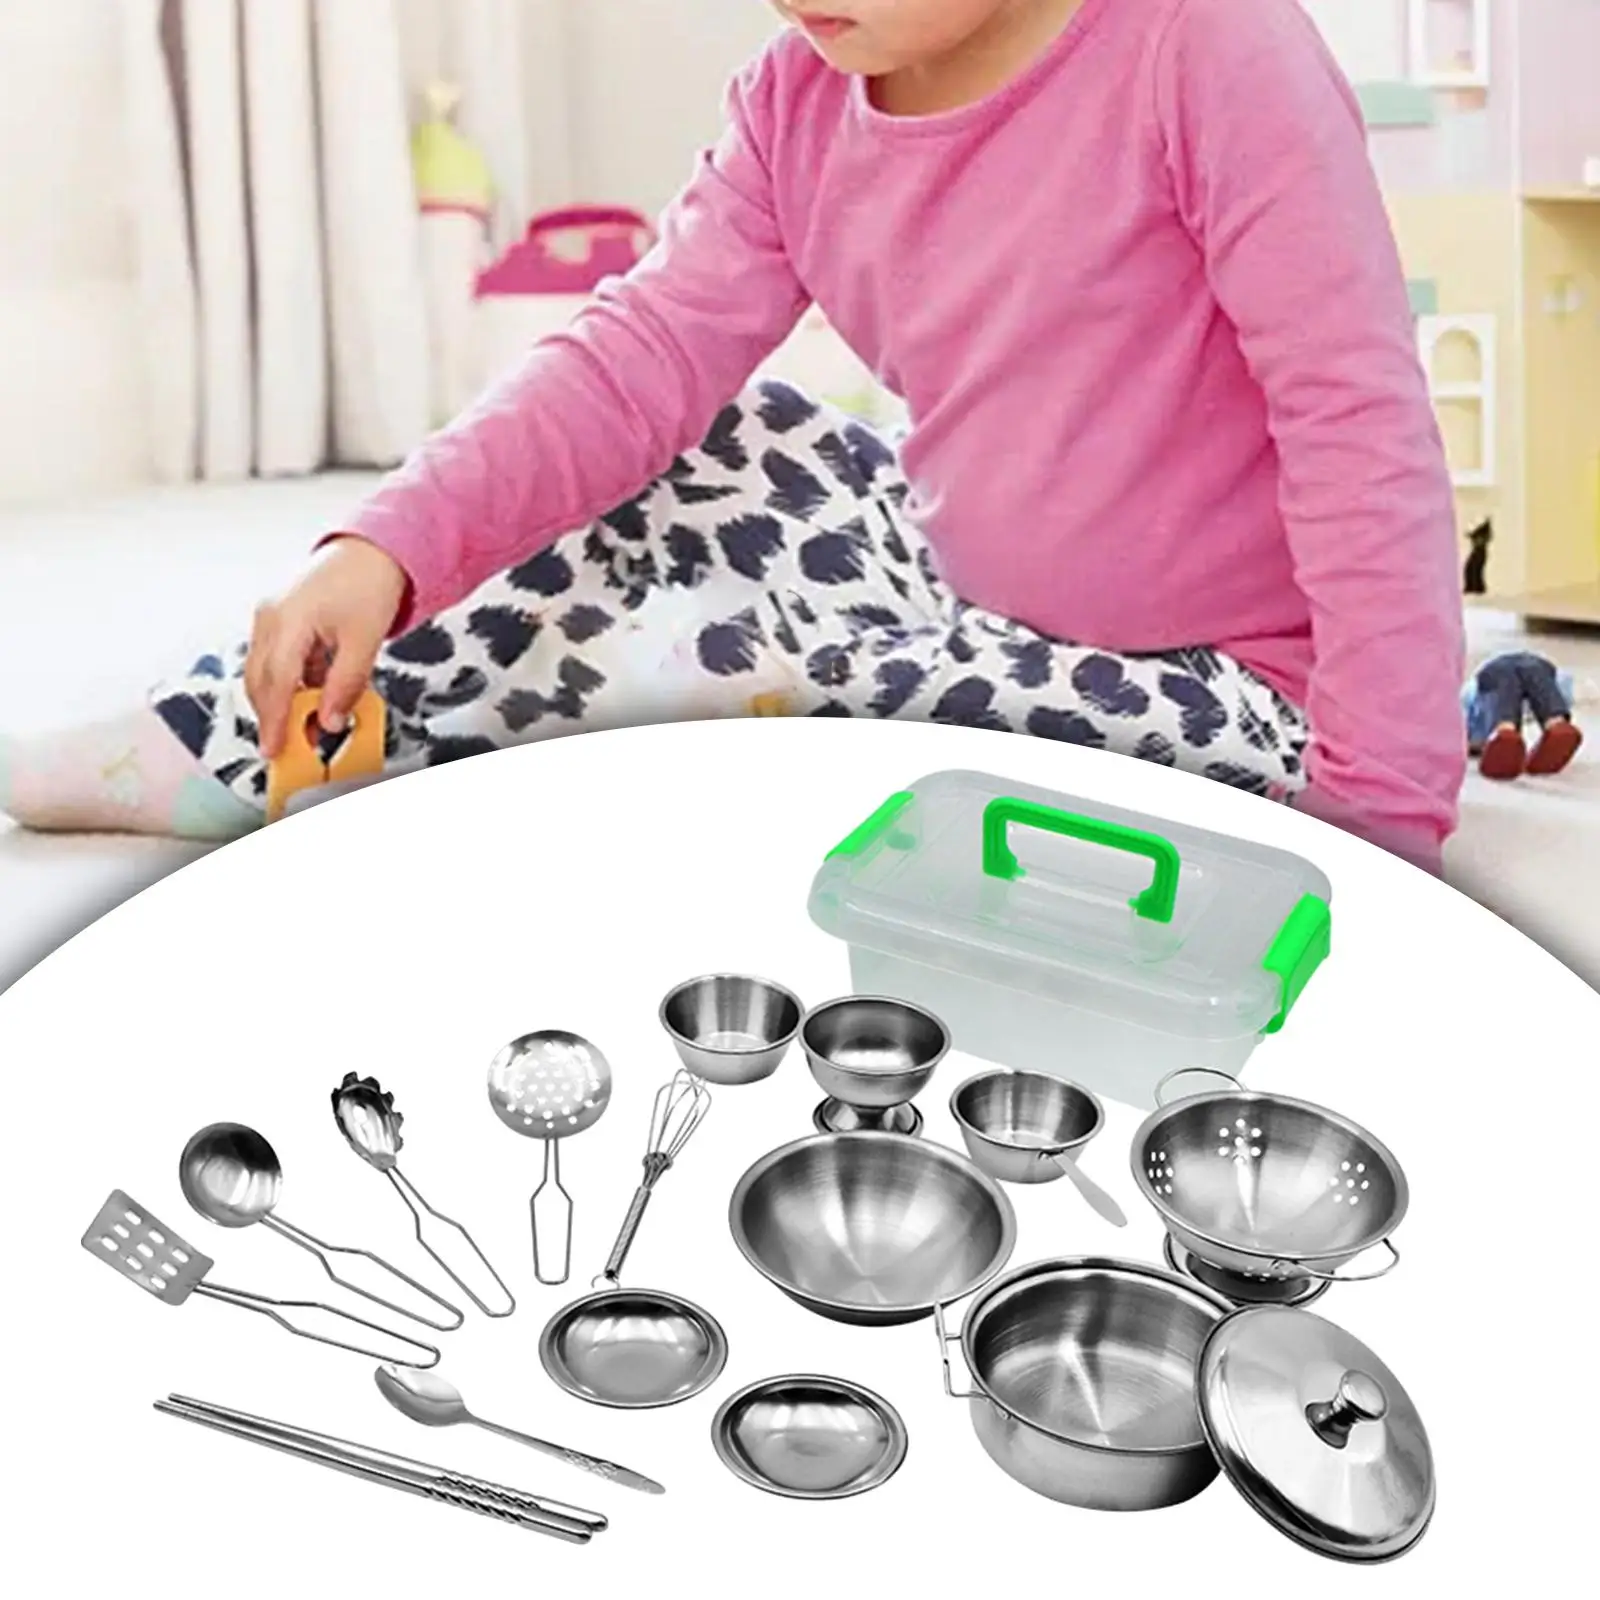 17Pcs Pretend Play Kitchen Toys Cookware Mini Stainless Steel Cookware Playset for Kids Party Favor Preschool Ages 3+ Years Old